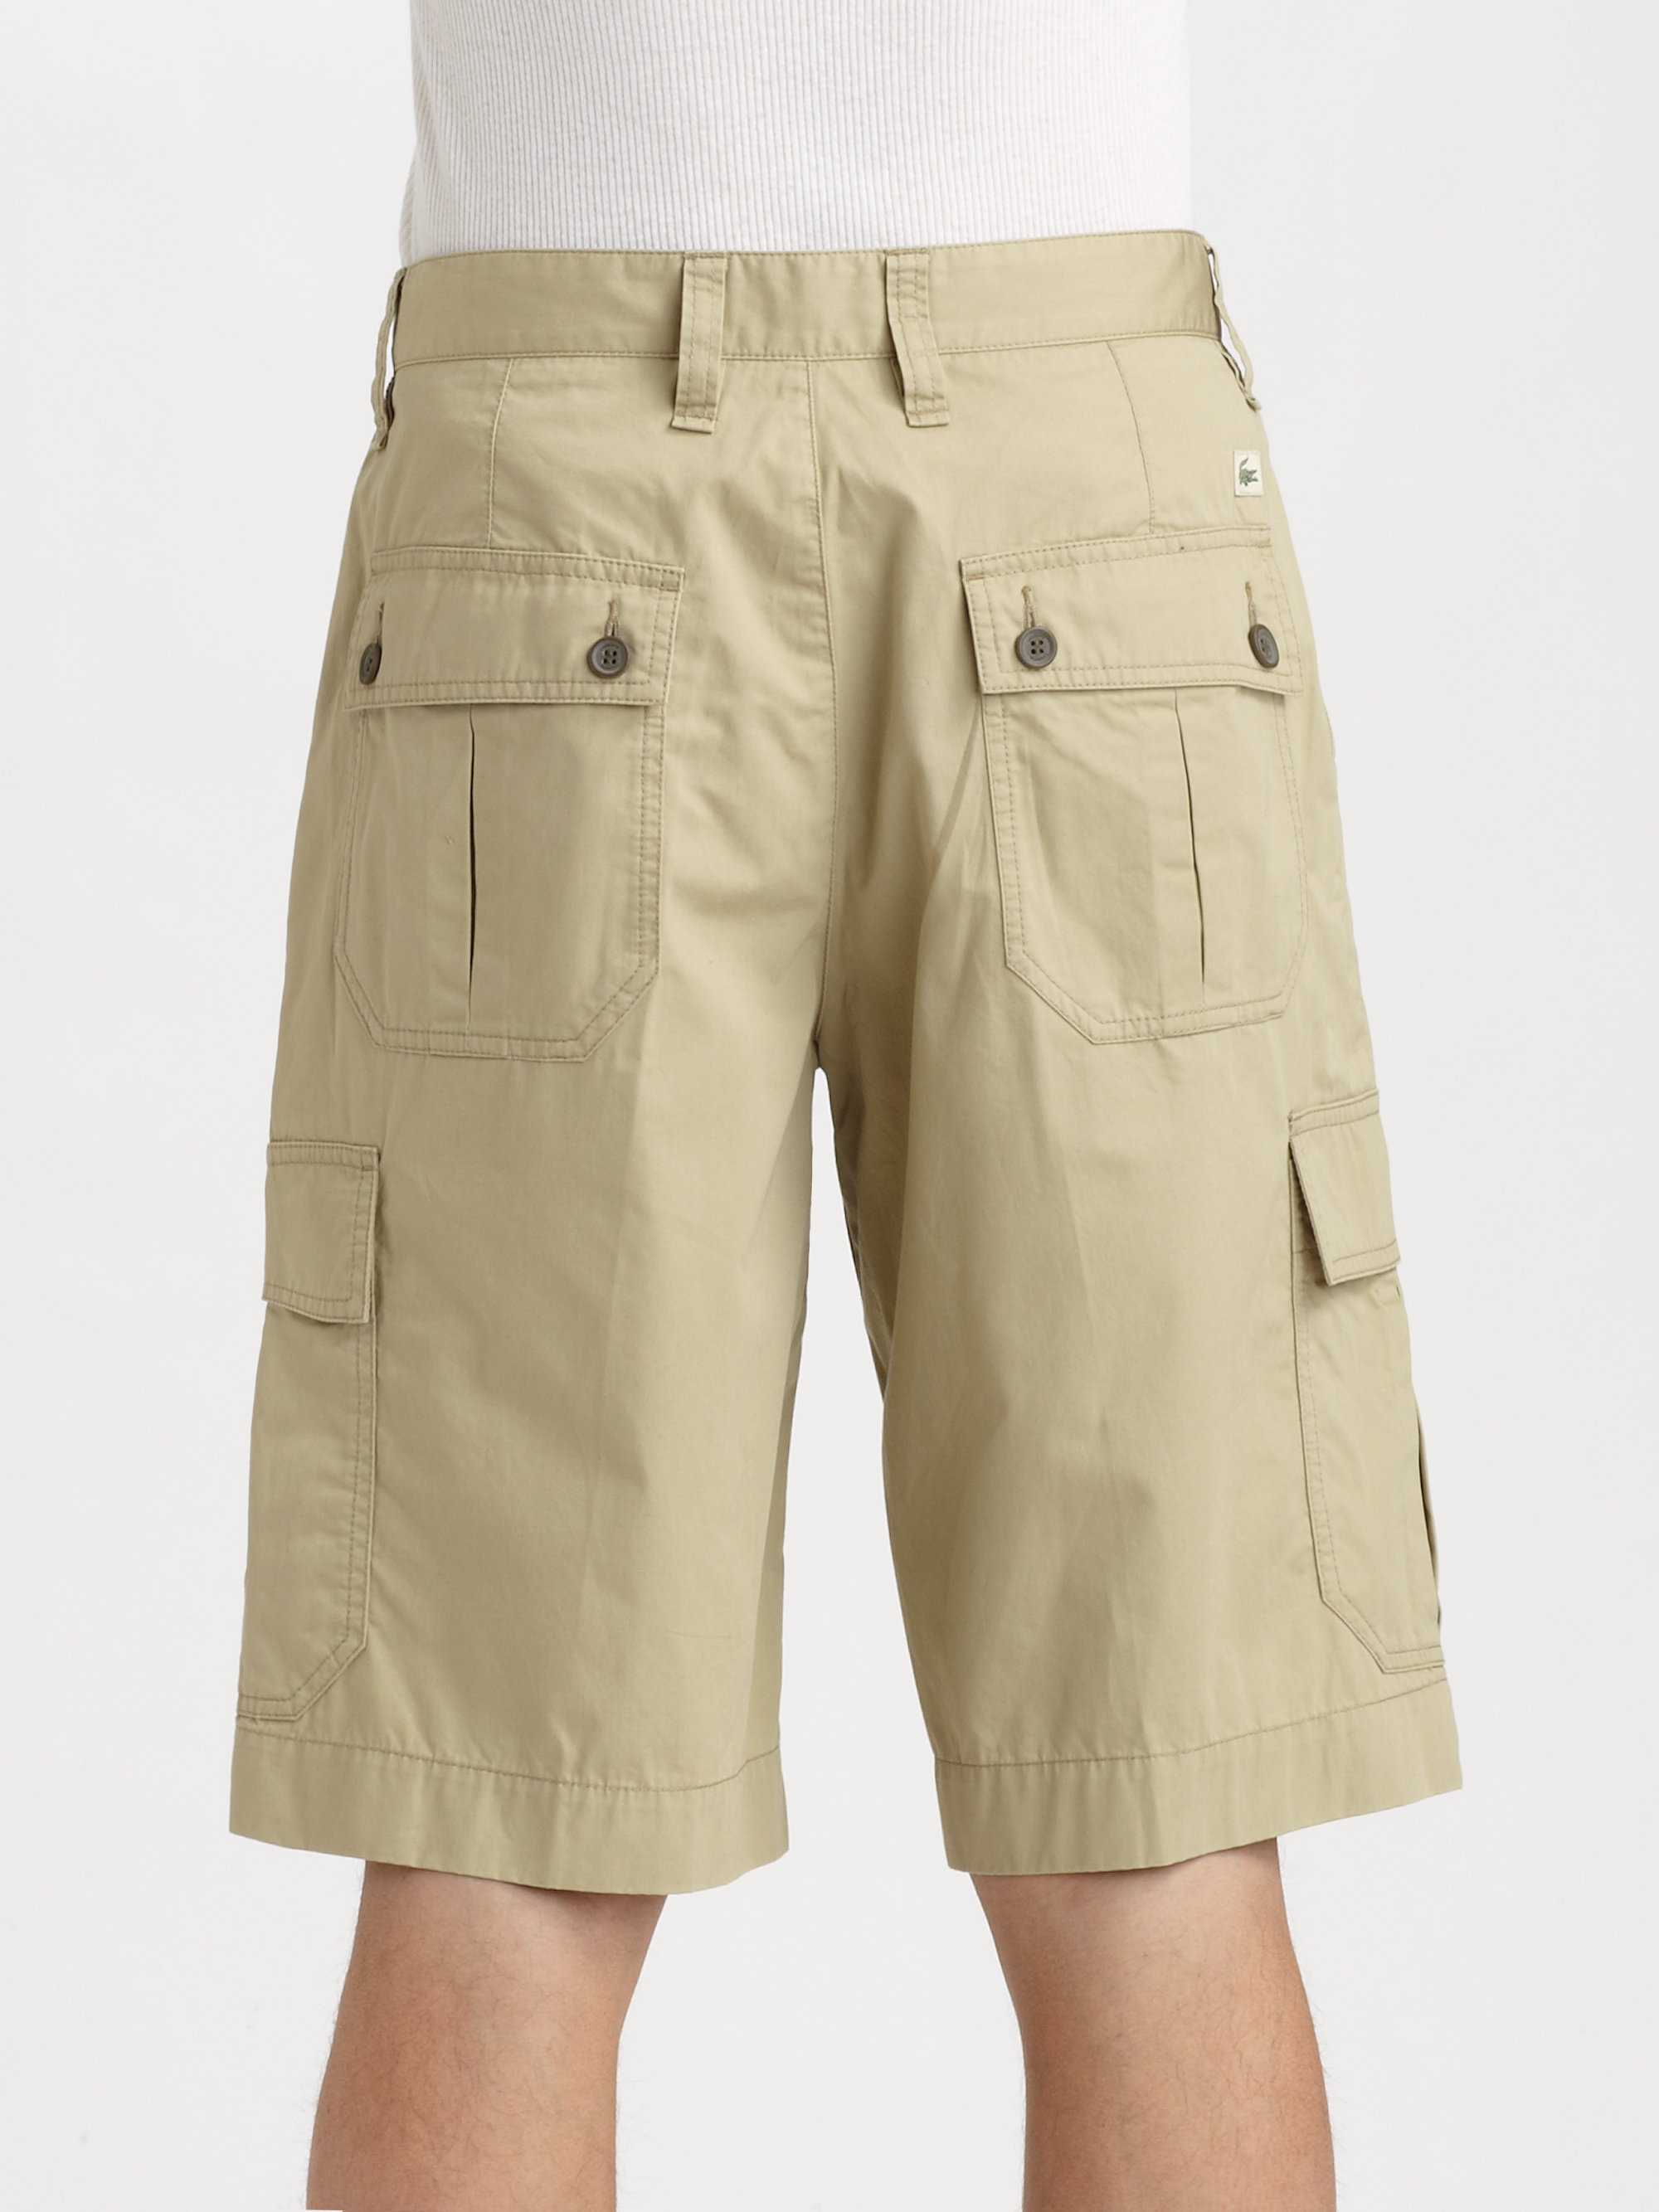 Lacoste Cargo Shorts in Khaki (Natural) for Men - Lyst